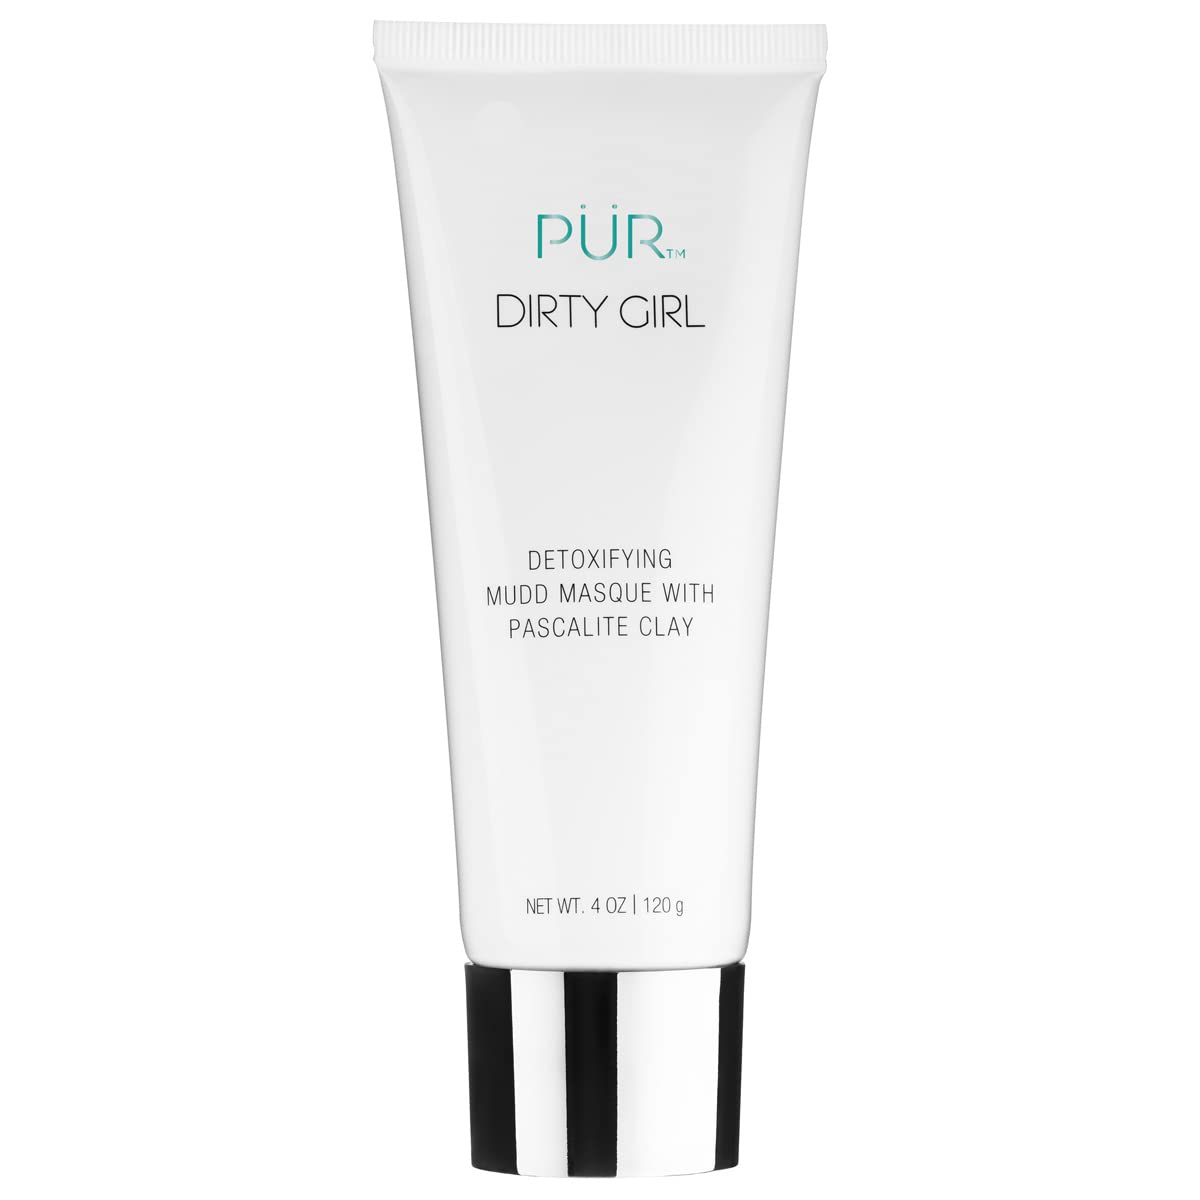 PÜR Dirty Girl Detoxifying Mudd Masque with Pascalite Clay 